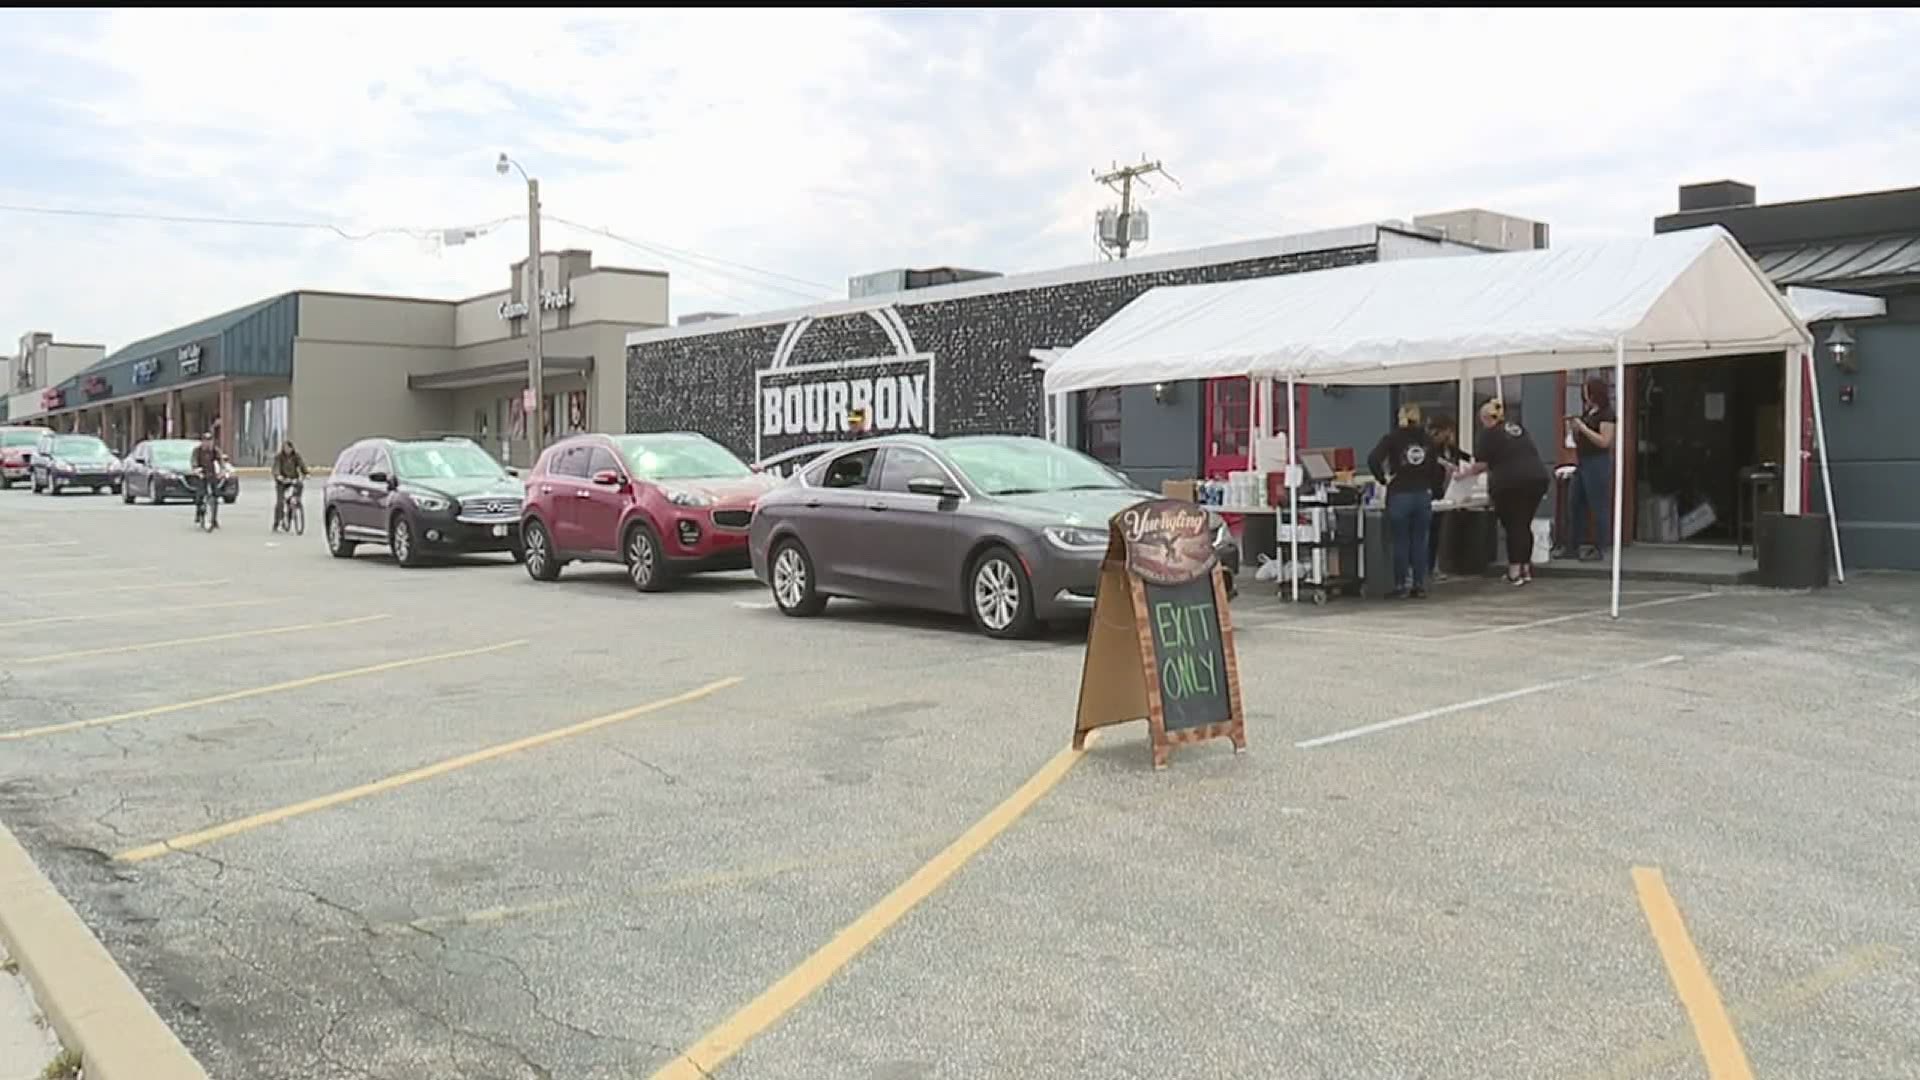 Bourbon Bar and Grill took an anonymous $300 donation and turned it into 700 pounds of cooked pork for dozens of families.